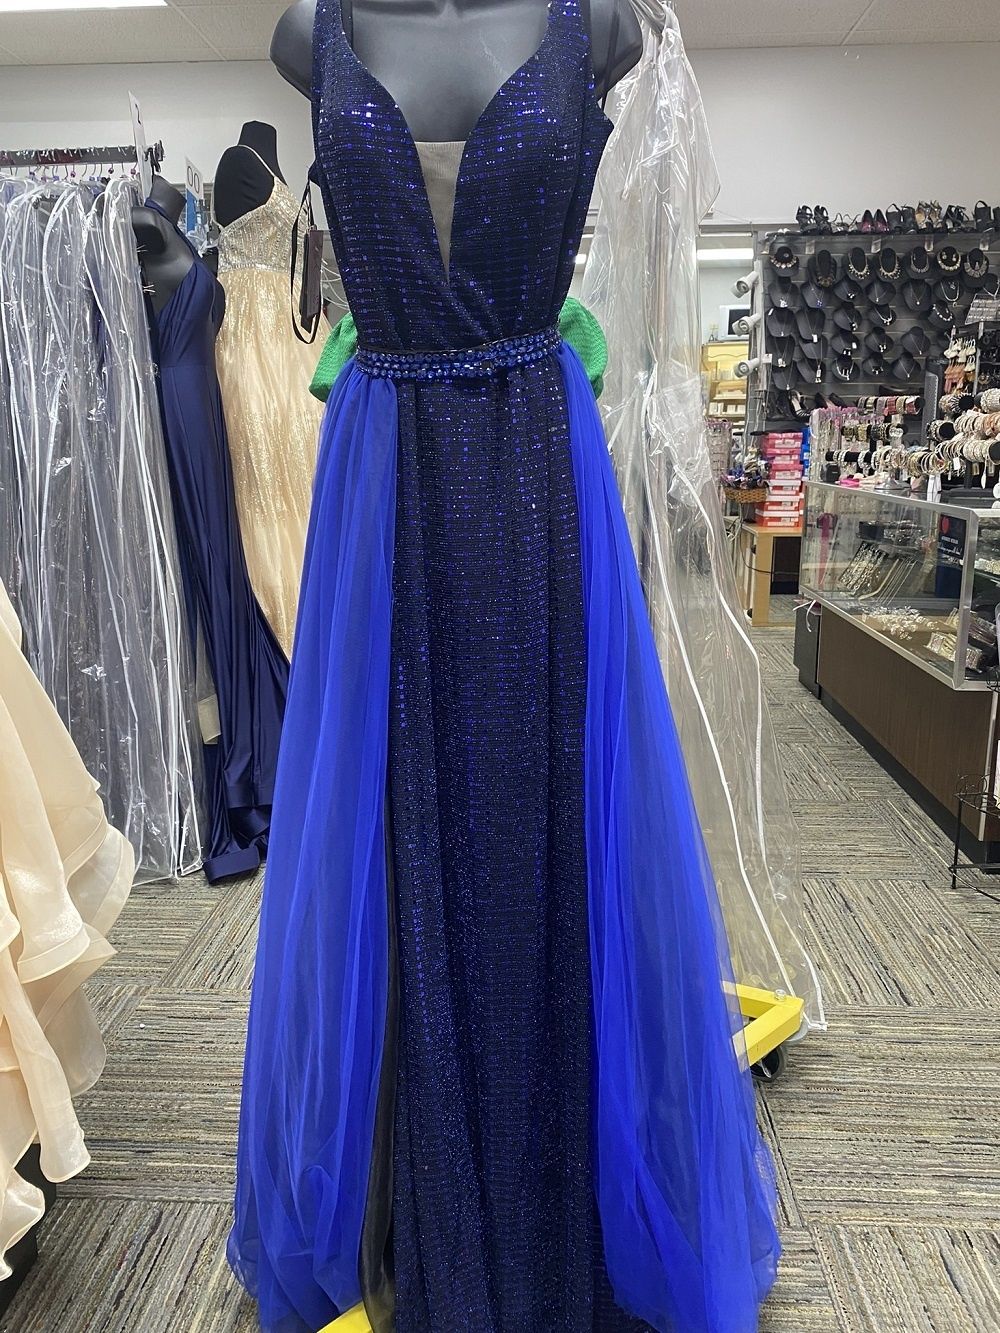 Style 28056 Lucci Lu Size 14 Royal Blue Ball Gown on Queenly